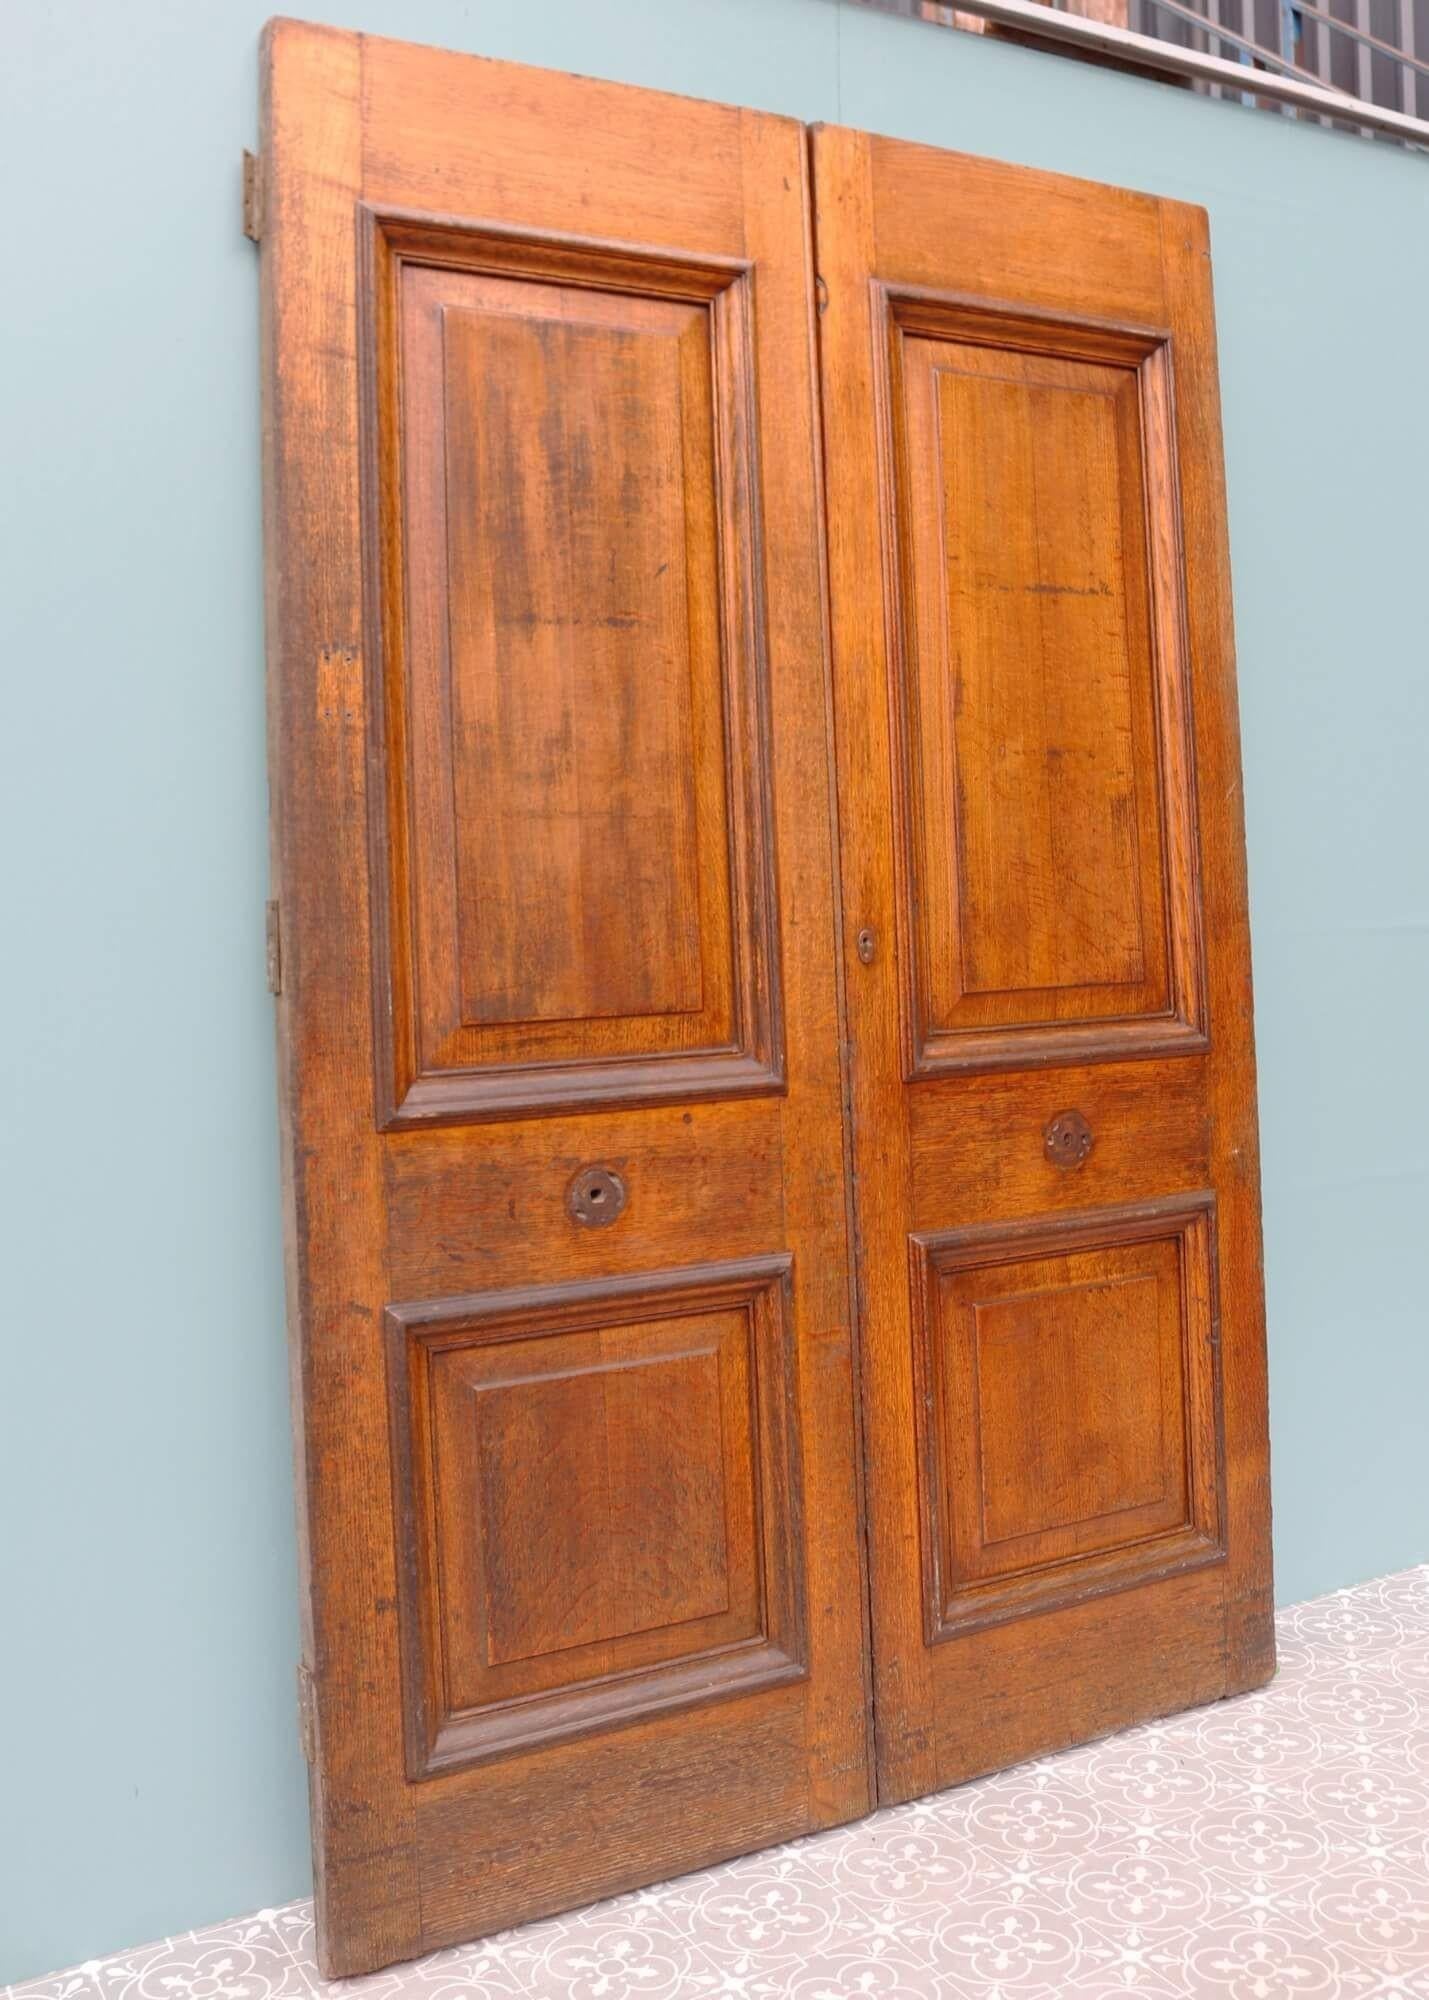 This handsome pair of large antique double front doors set the stage as an impressive entrance to an Edwardian or Victorian townhouse. Dating from the early 20th century, these double doors have a warm and inviting colour that showcases the unique